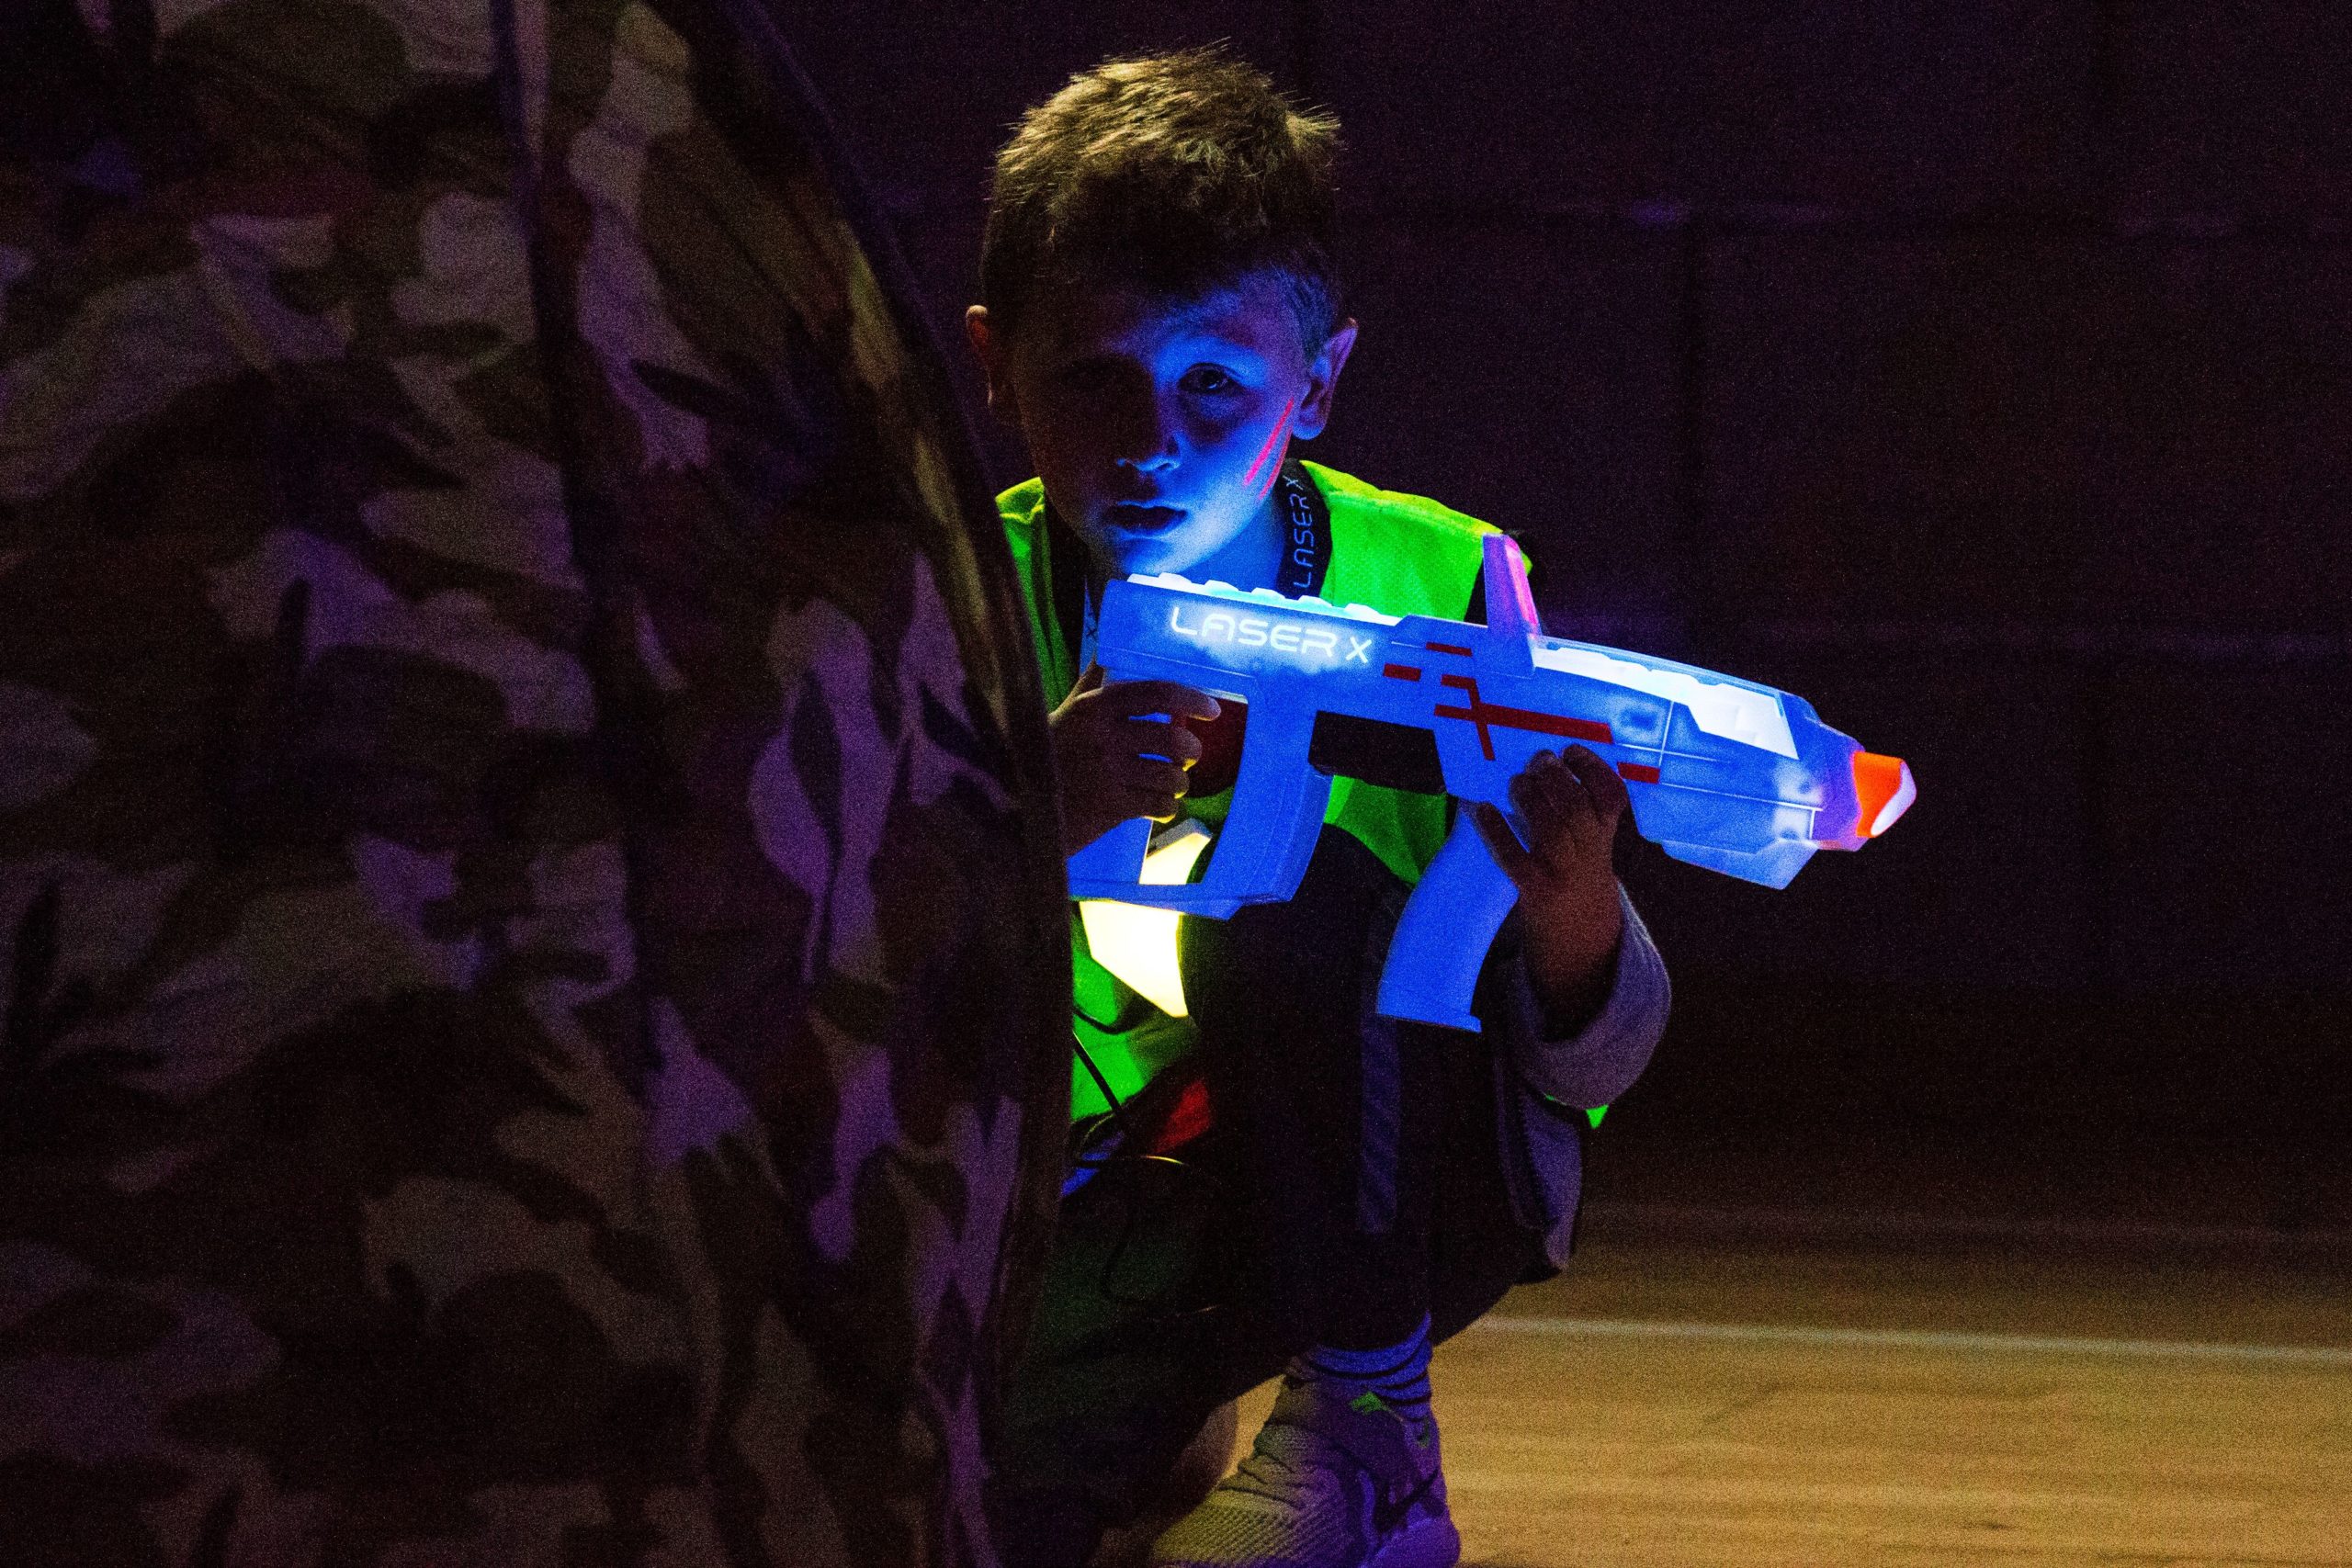 Laser Tag Party at Matthew Arnold Sports Centre (Staines)